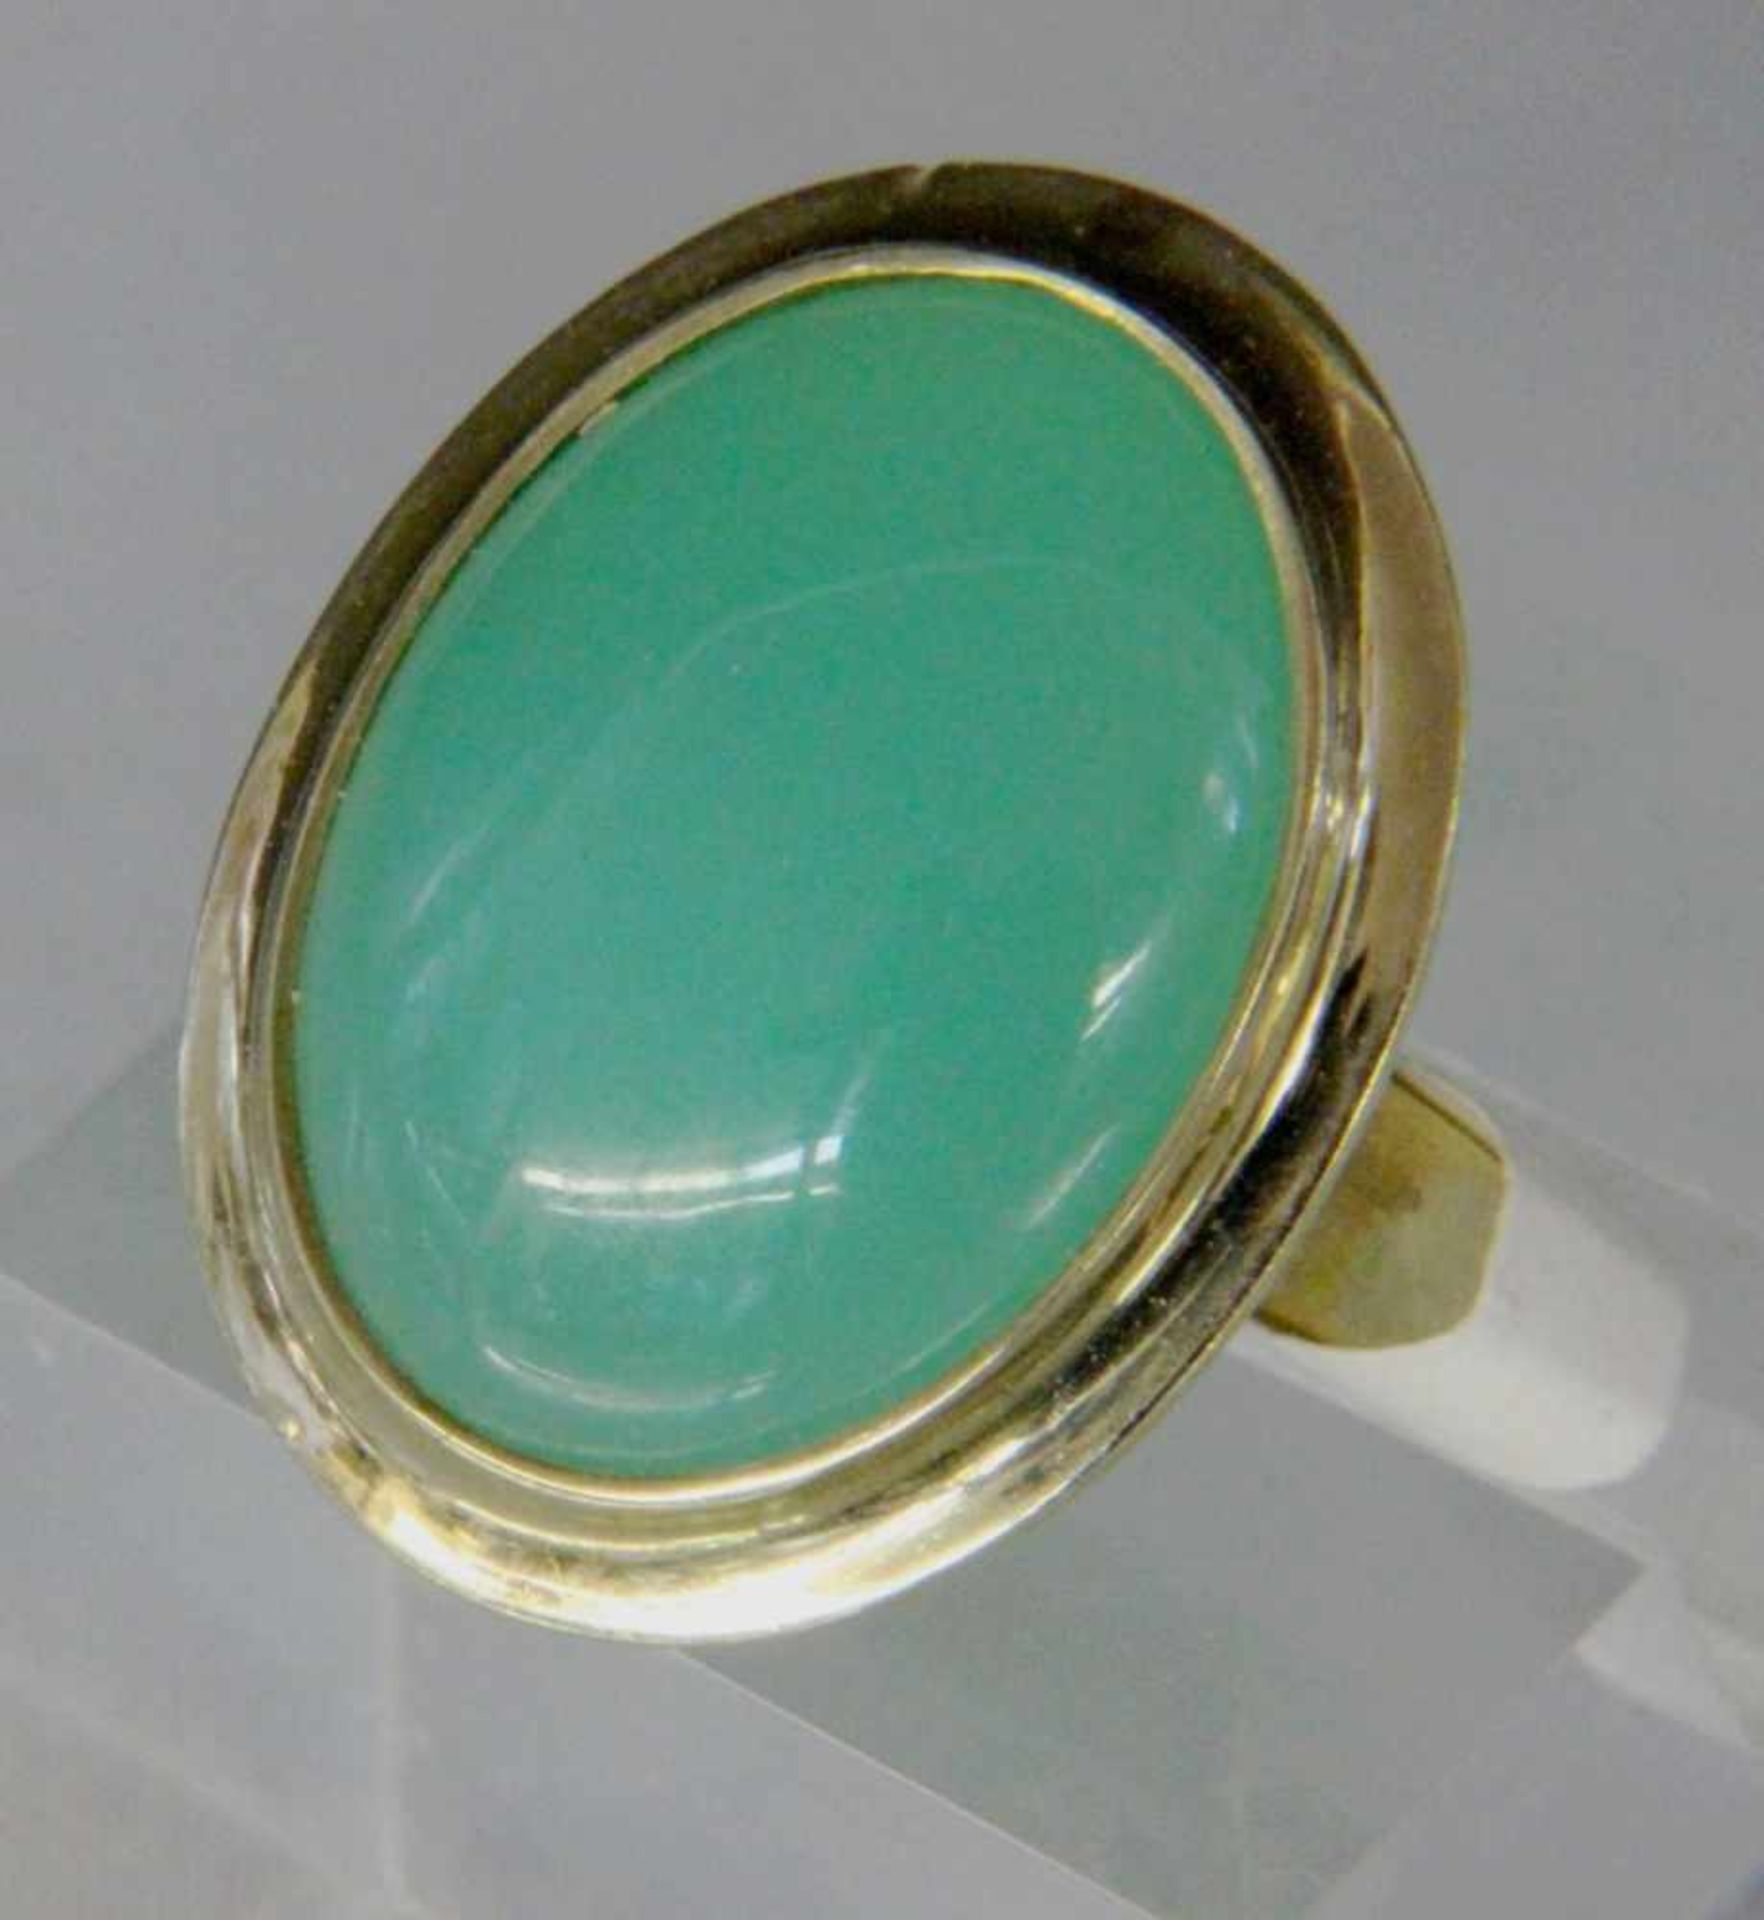 RING, 585/000 Gelbgold mit Chrysopras. Brutto ca. 8g A RING, 585/000 yellow gold set with